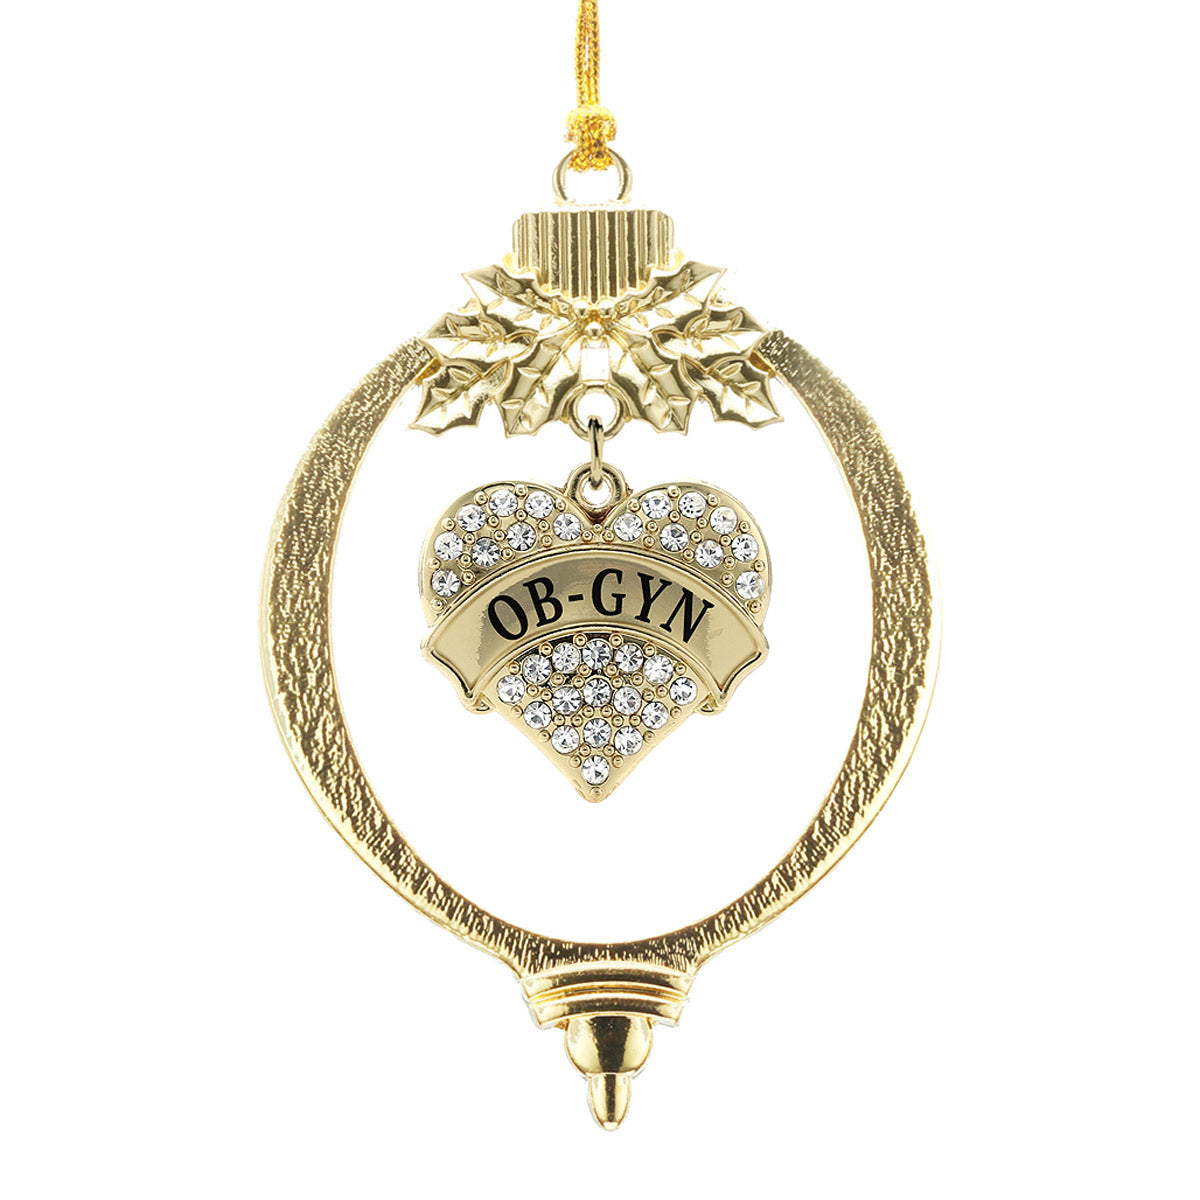 Gold Ob- Gyn Pave Heart Charm Holiday Ornament